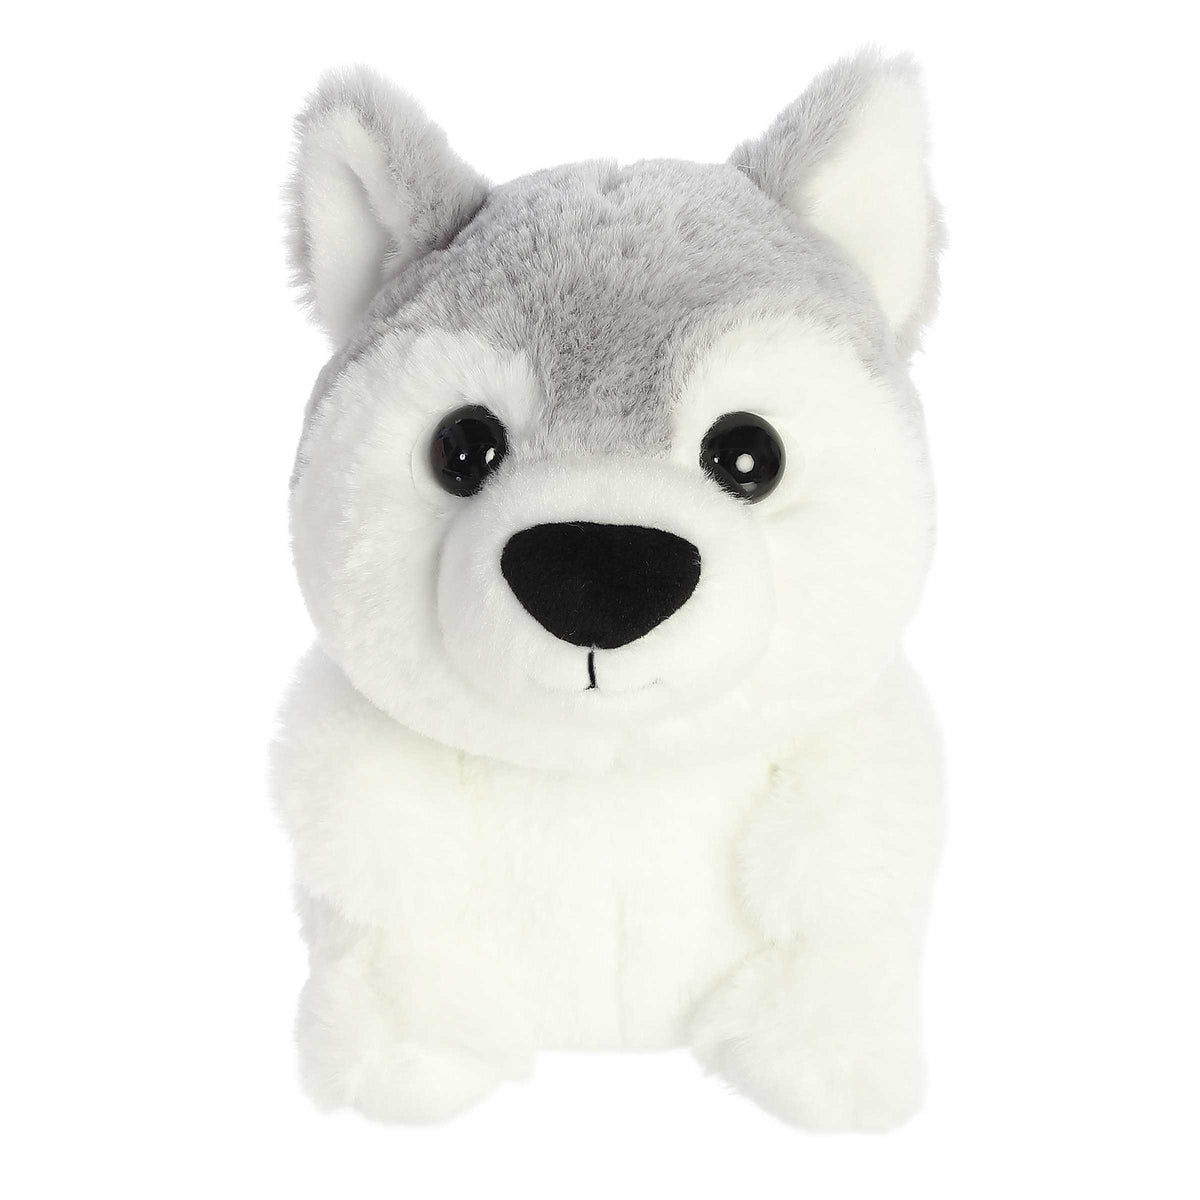 Adorable white husky puppy Stuffed animals with soft white and gray fur, black accents on its nose, and shiny eyes